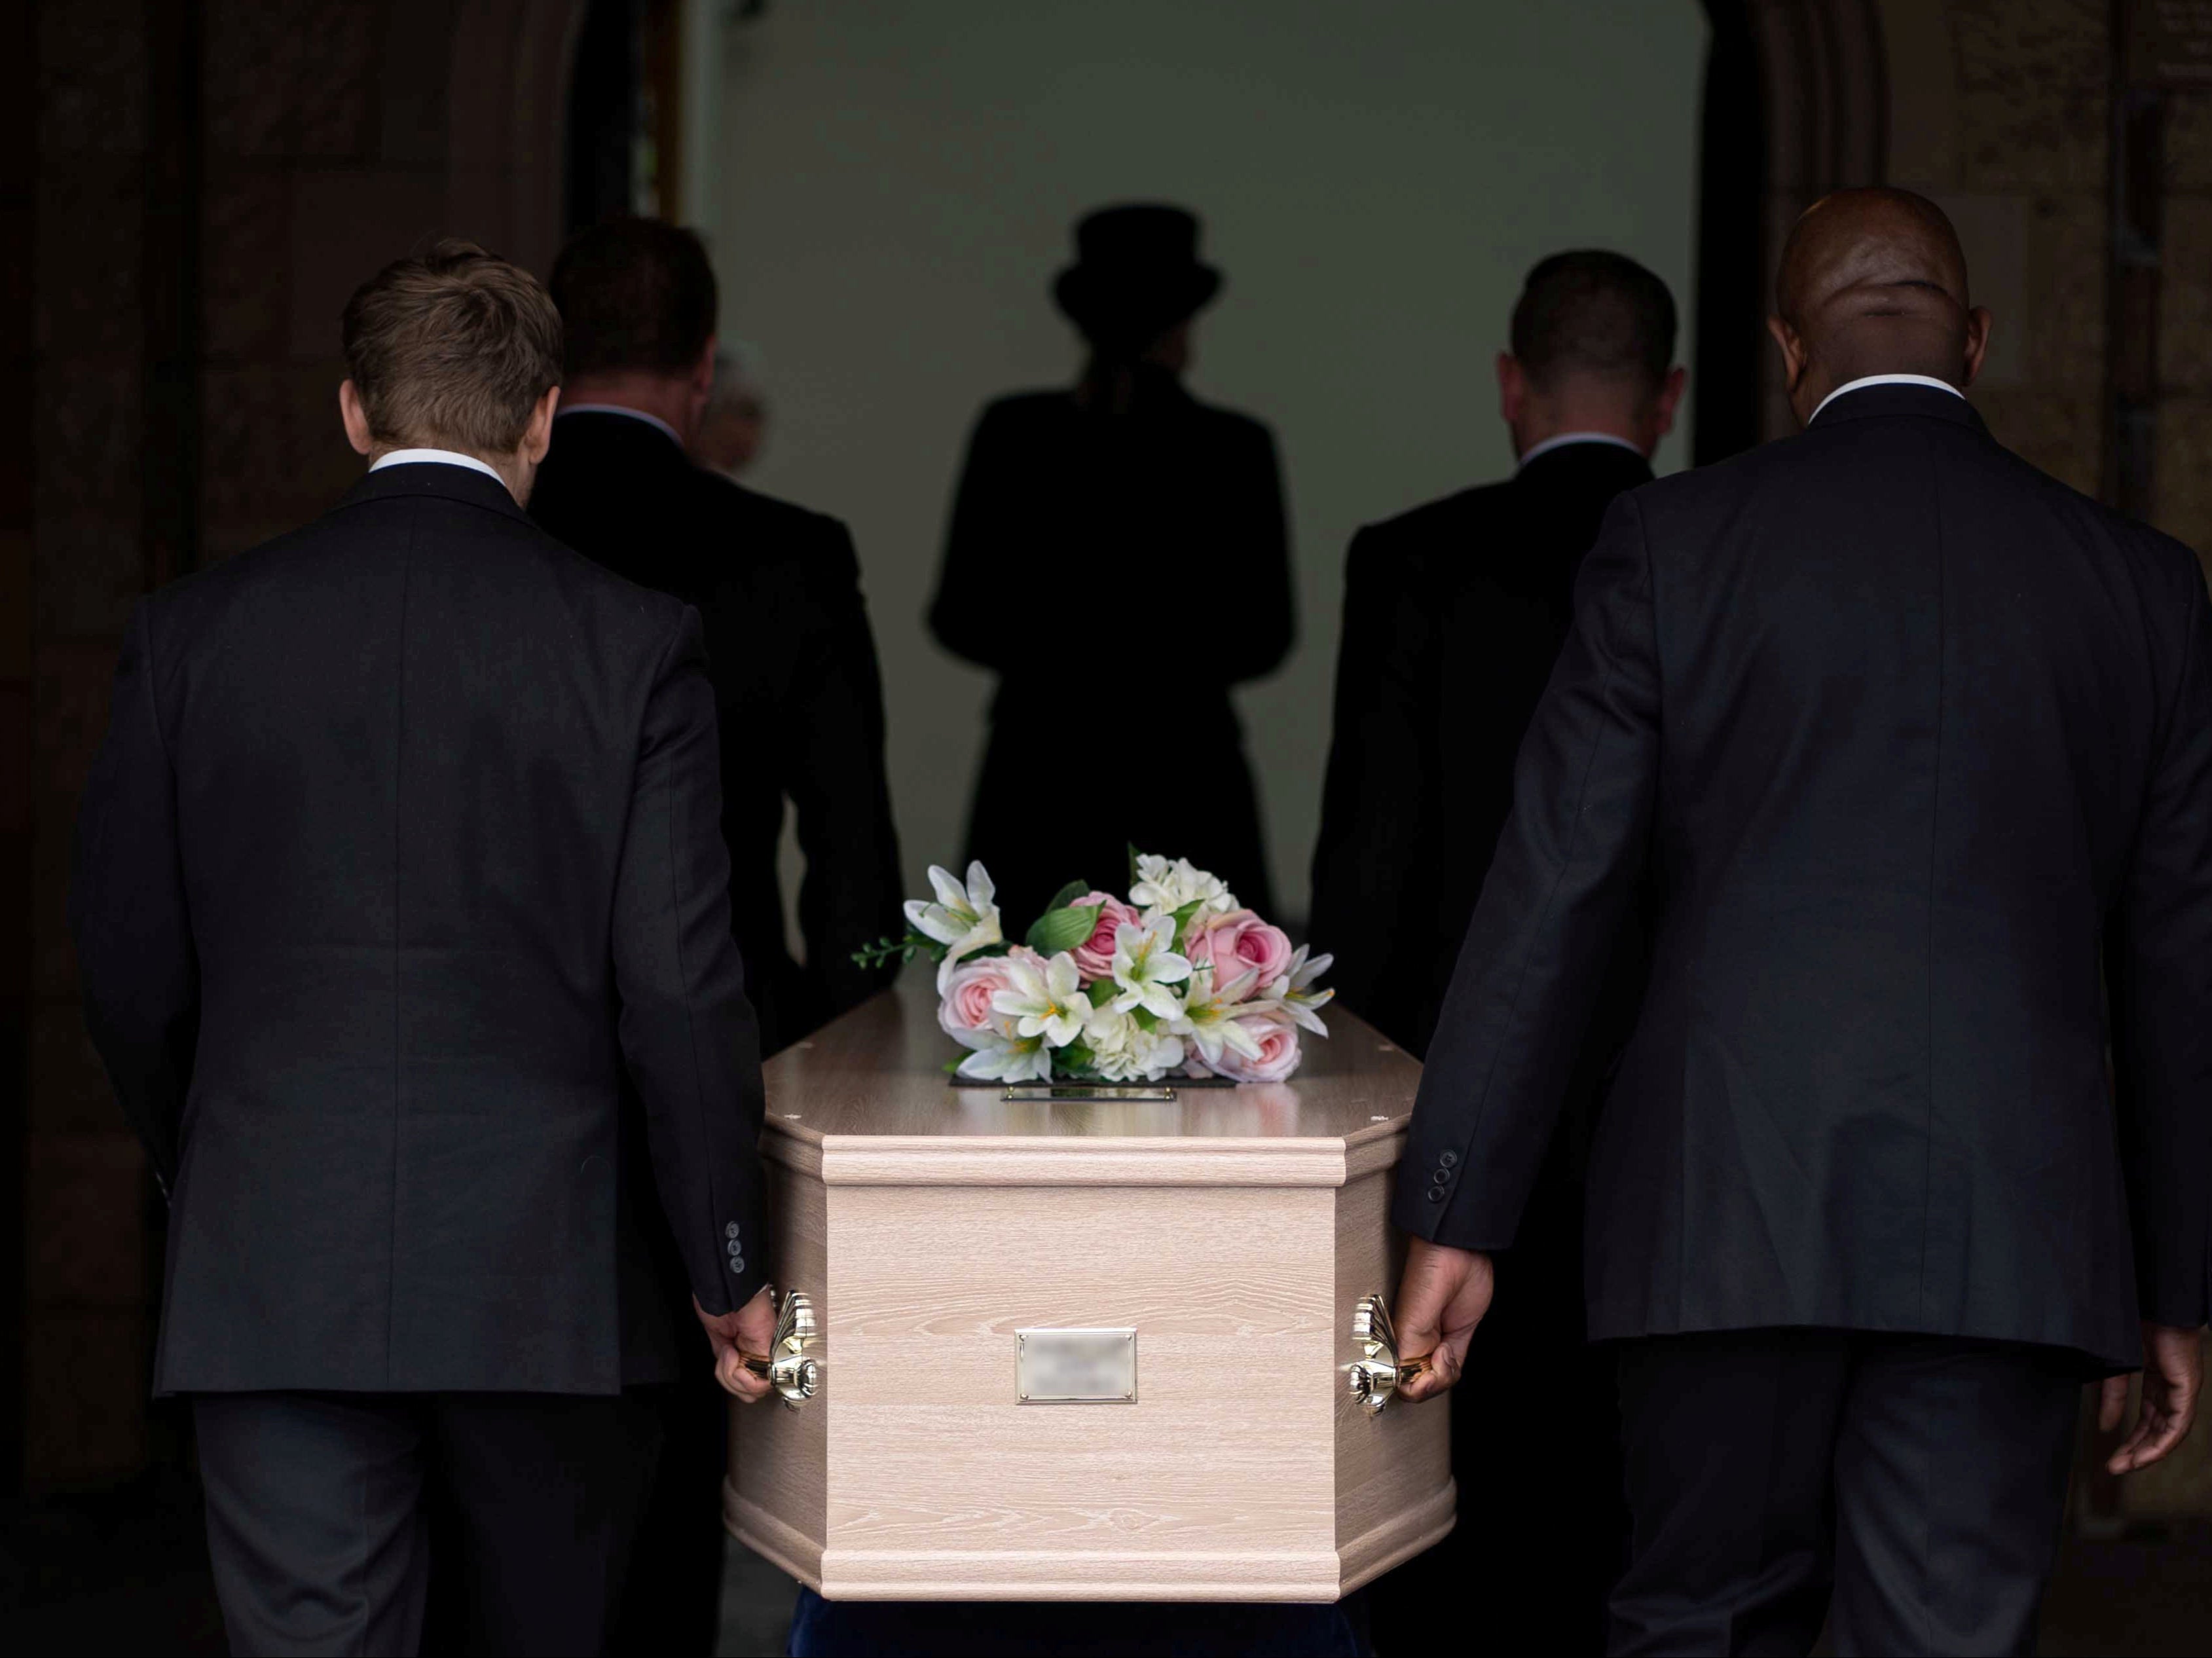 Many people say they’ve been unable to grieve properly due to stress of arranging funeral